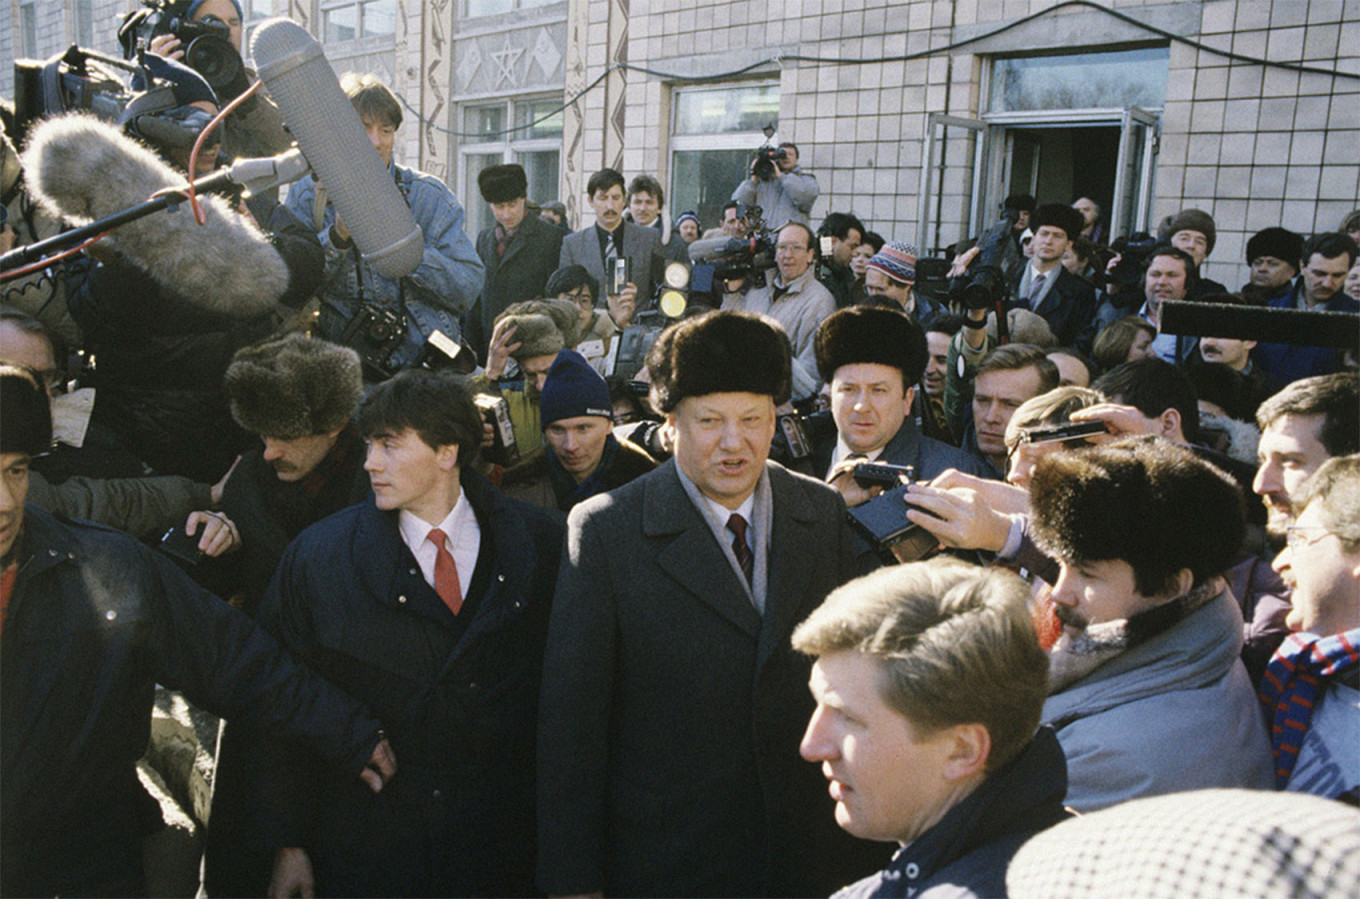 
					Boris Yeltsin, Chairman of the Supreme Soviet of the Russian SFSR, surrounded by journalists near a polling station during a referendum on the future of the Soviet Union in March 1991.					 					RIA Novosti archive (CC BY-SA 3.0)				